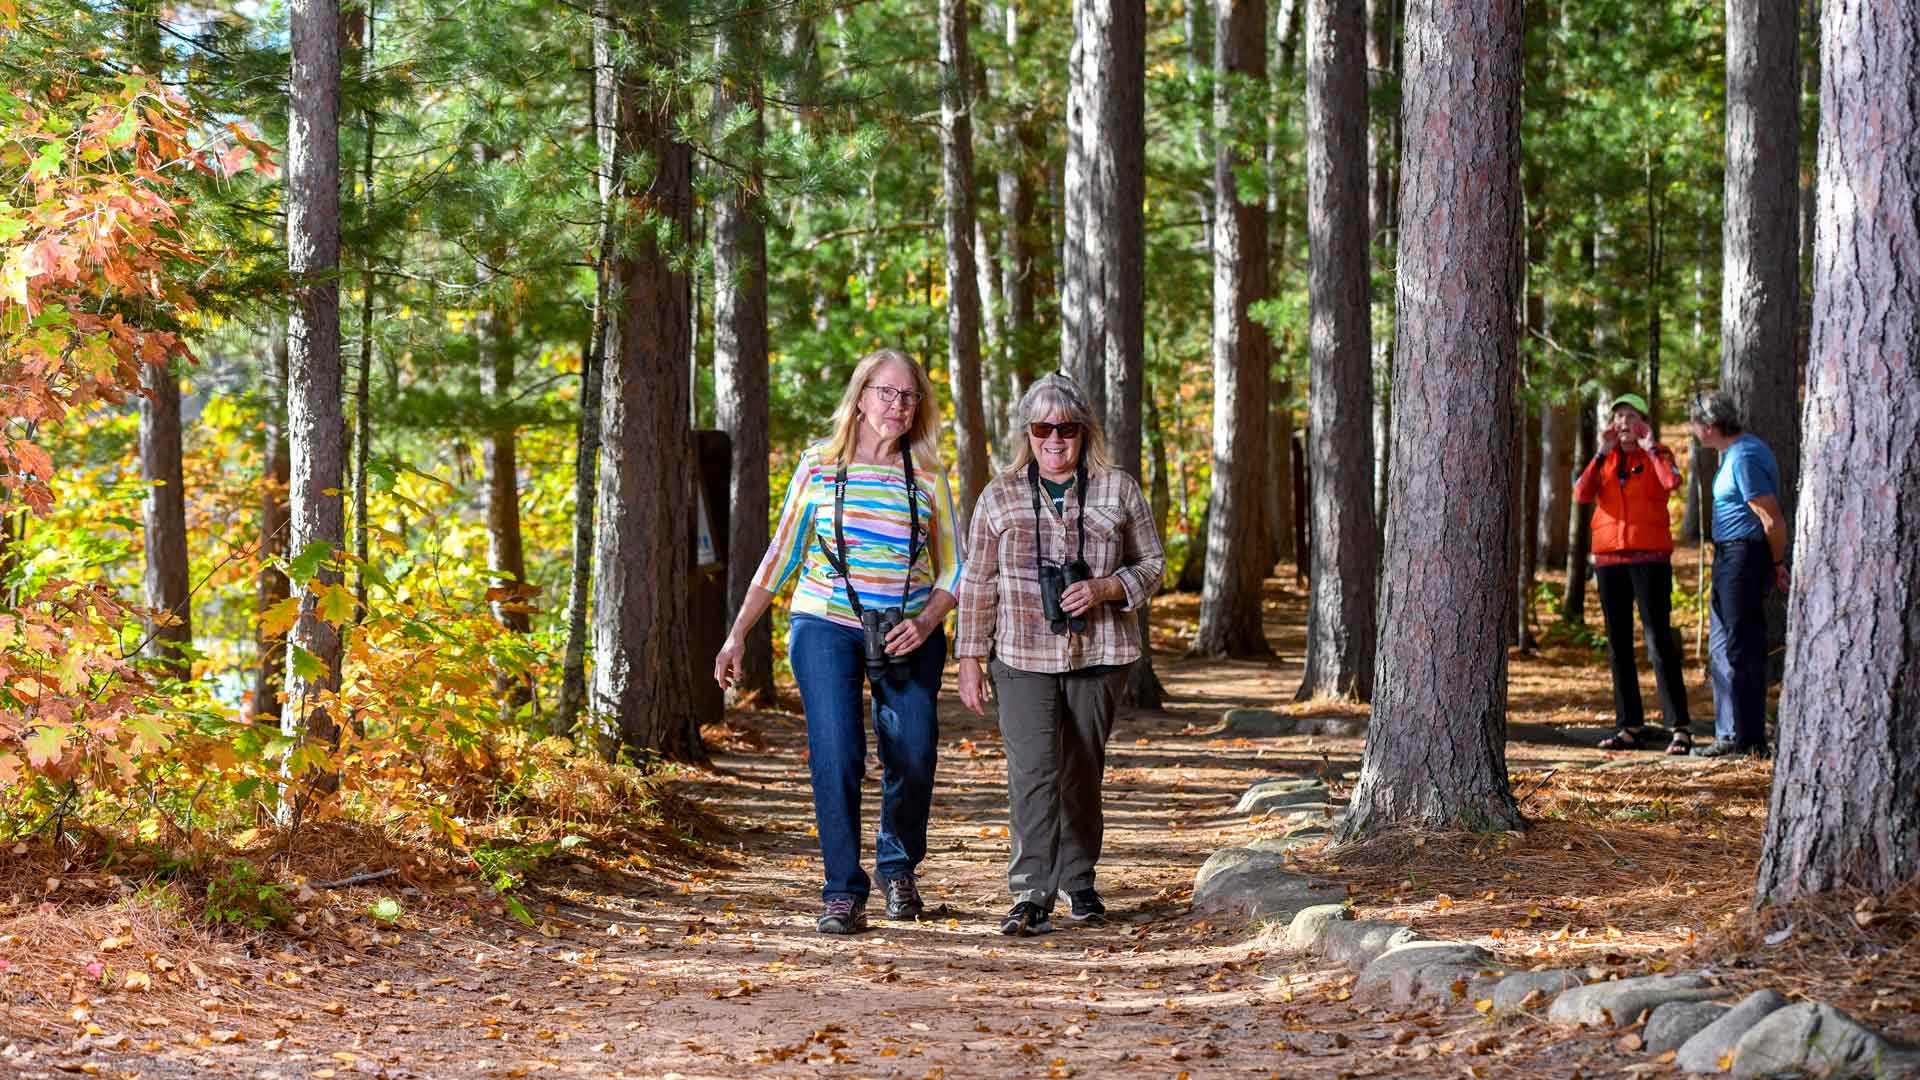 Pair walking on fall forest path of North Lakeland School Nature & Cross-Country Ski Trail System in Vilas County, Wisconsin